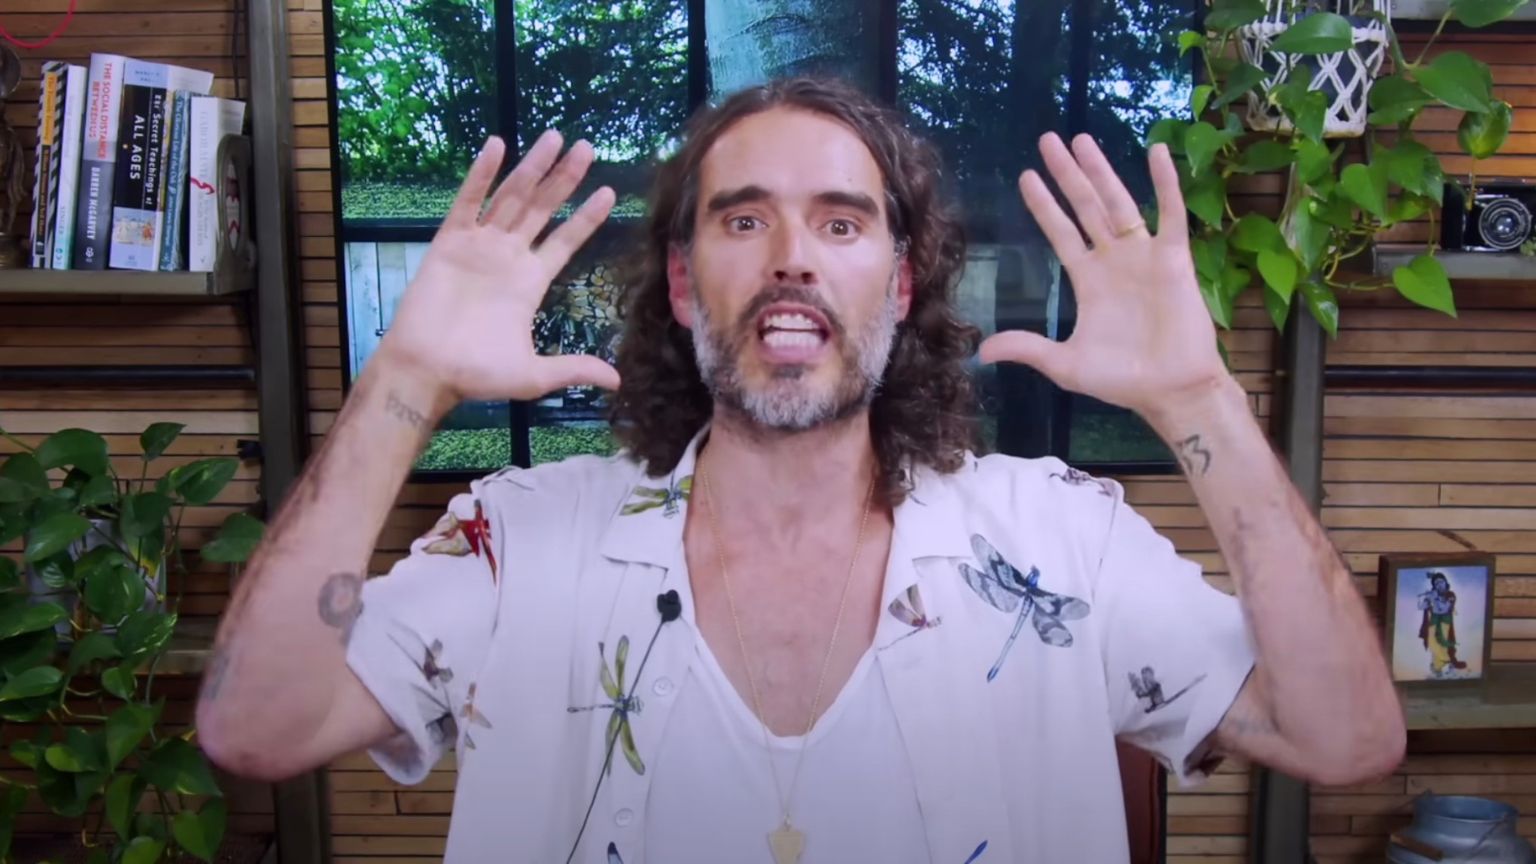 YouTube Targets Russell Brand, Cuts Off His Income, Despite No Content Violations